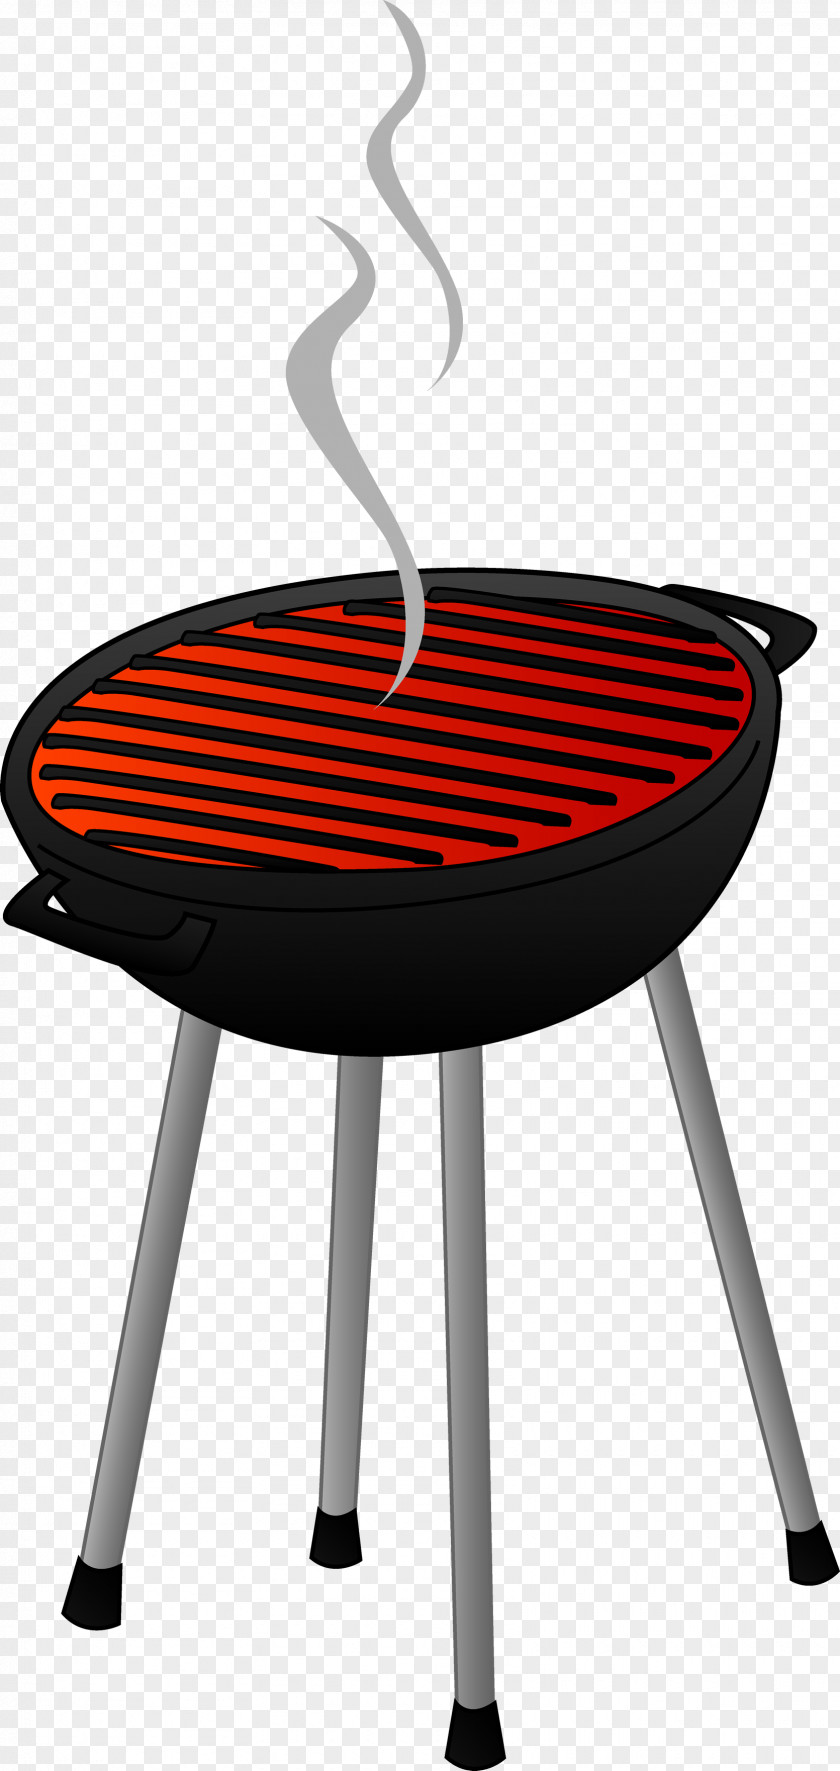 Grill Barbecue Grilling Sauce Clip Art PNG